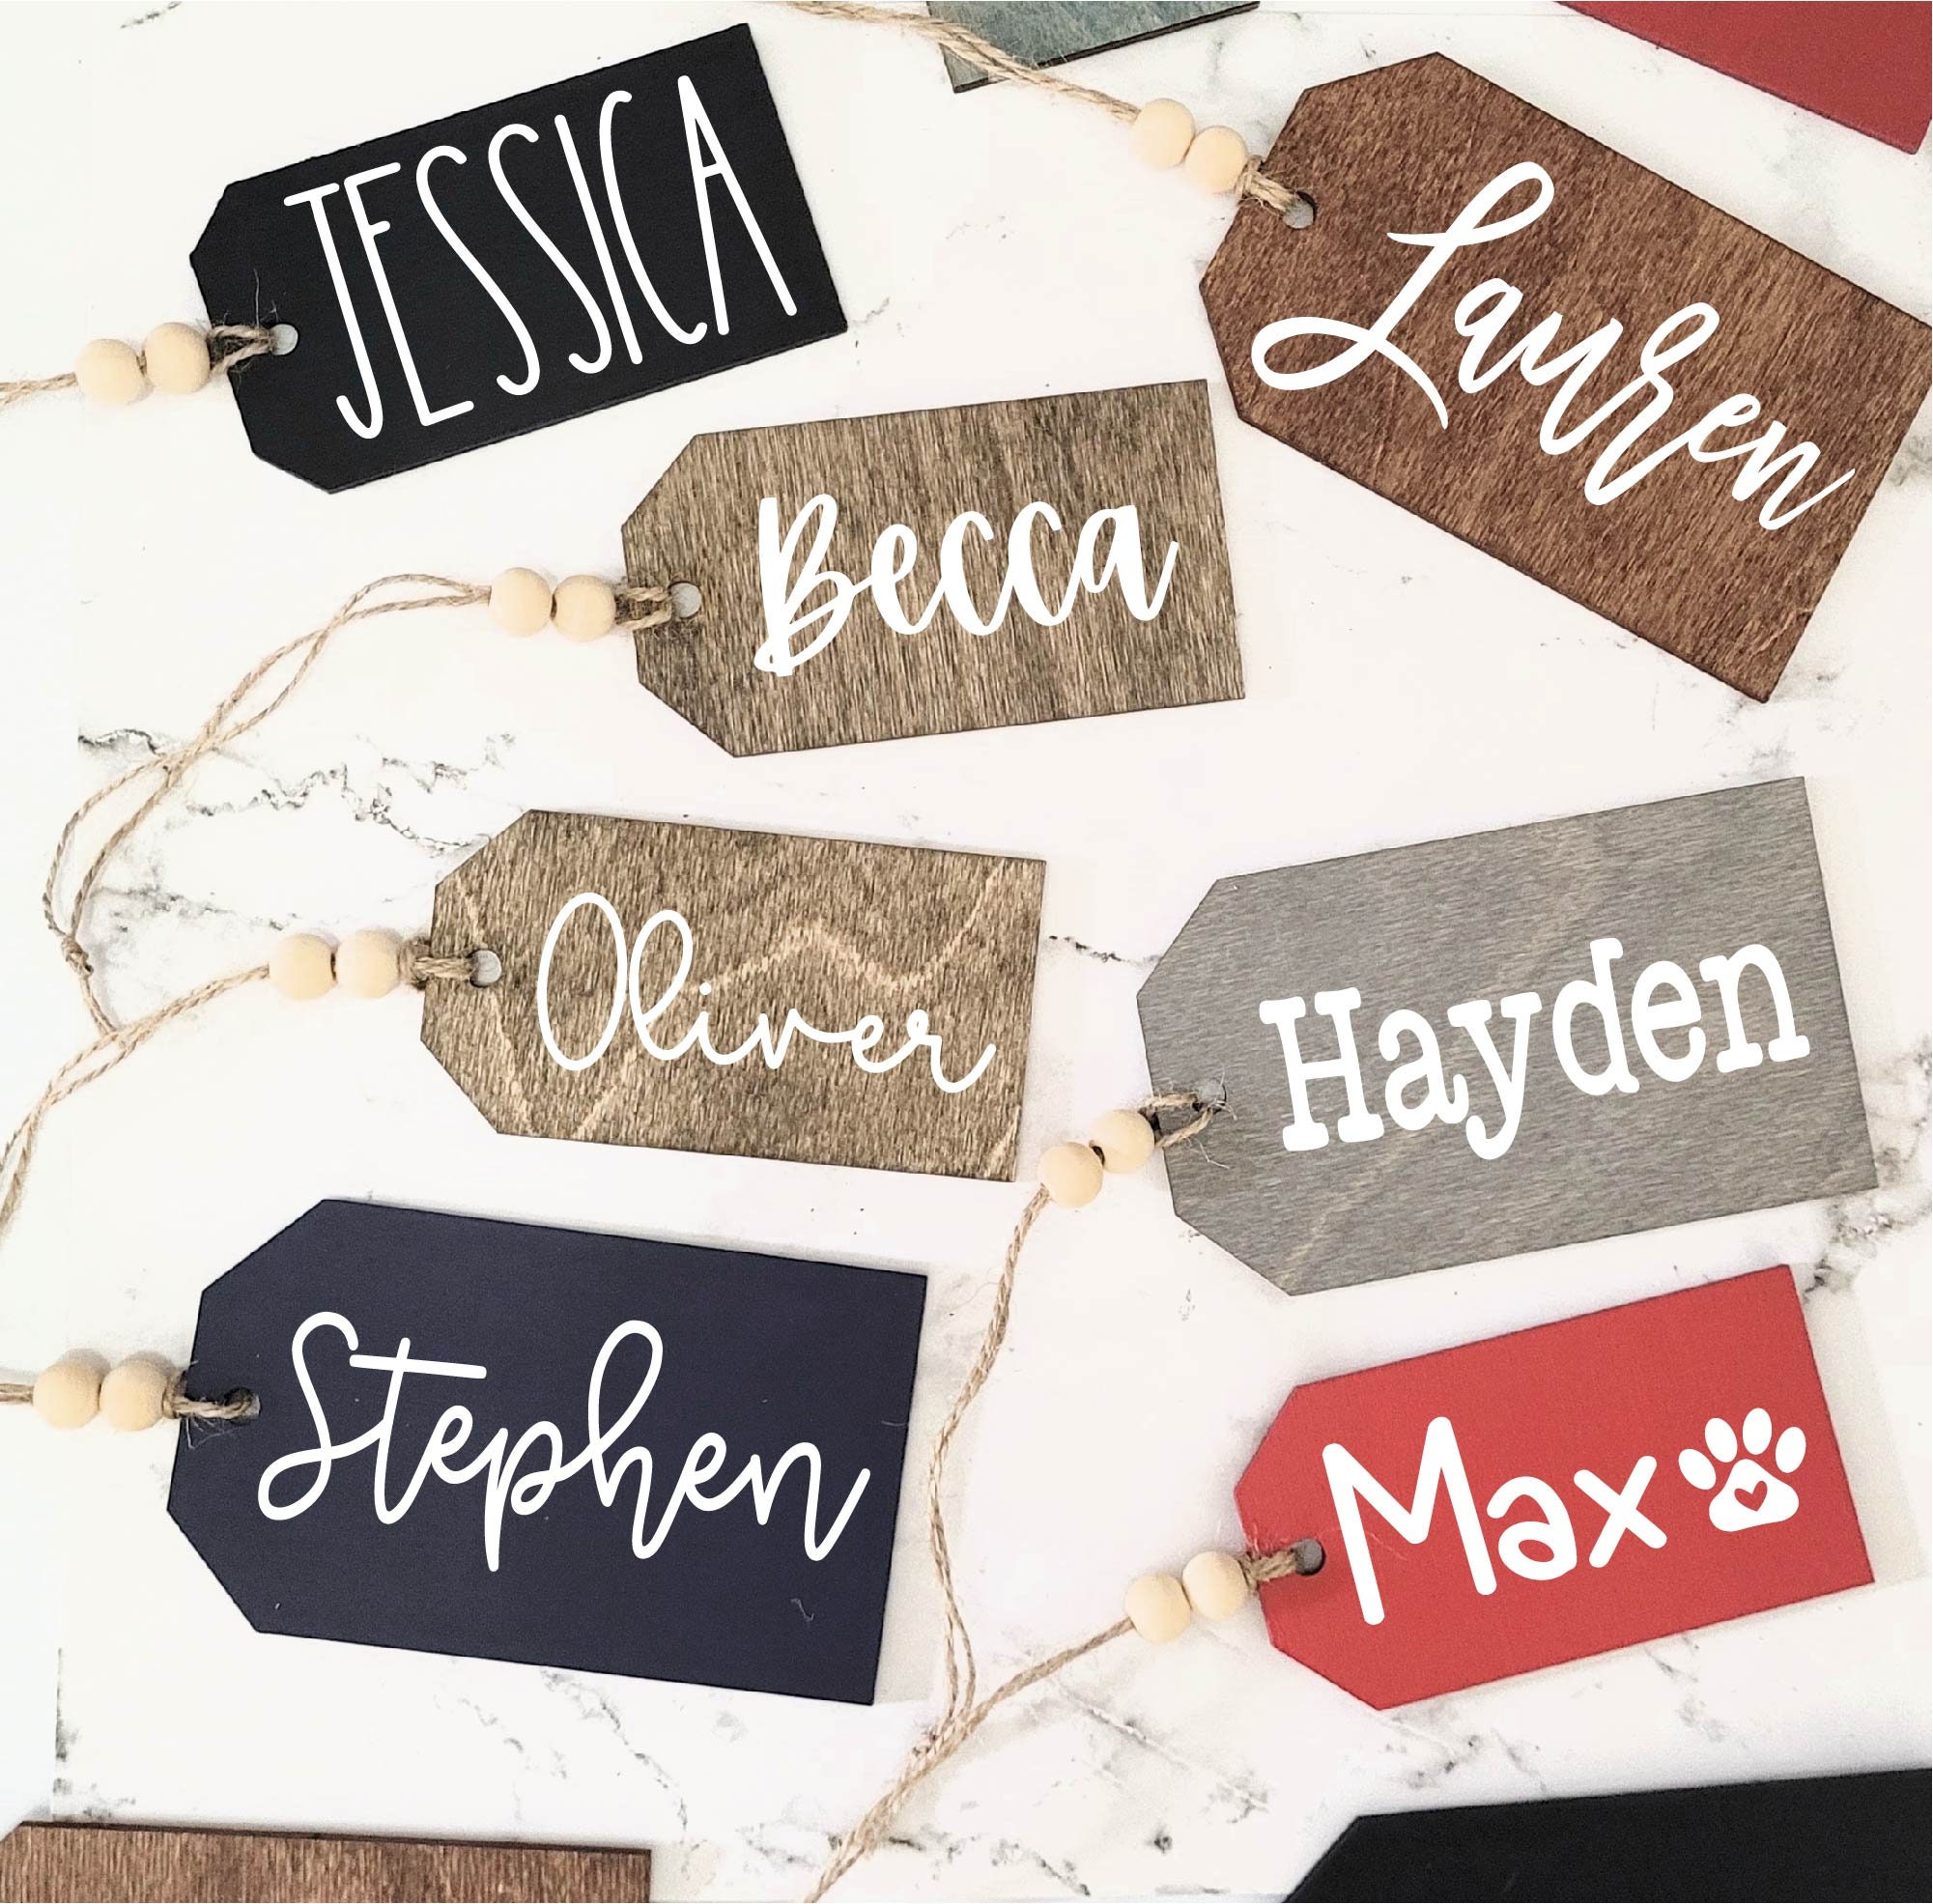 Christmas Stocking Name Tags Wooden Name Tags Gift Tags Wooden Tags  Stocking Tags Merry Christmas Place Setting Name Tags 